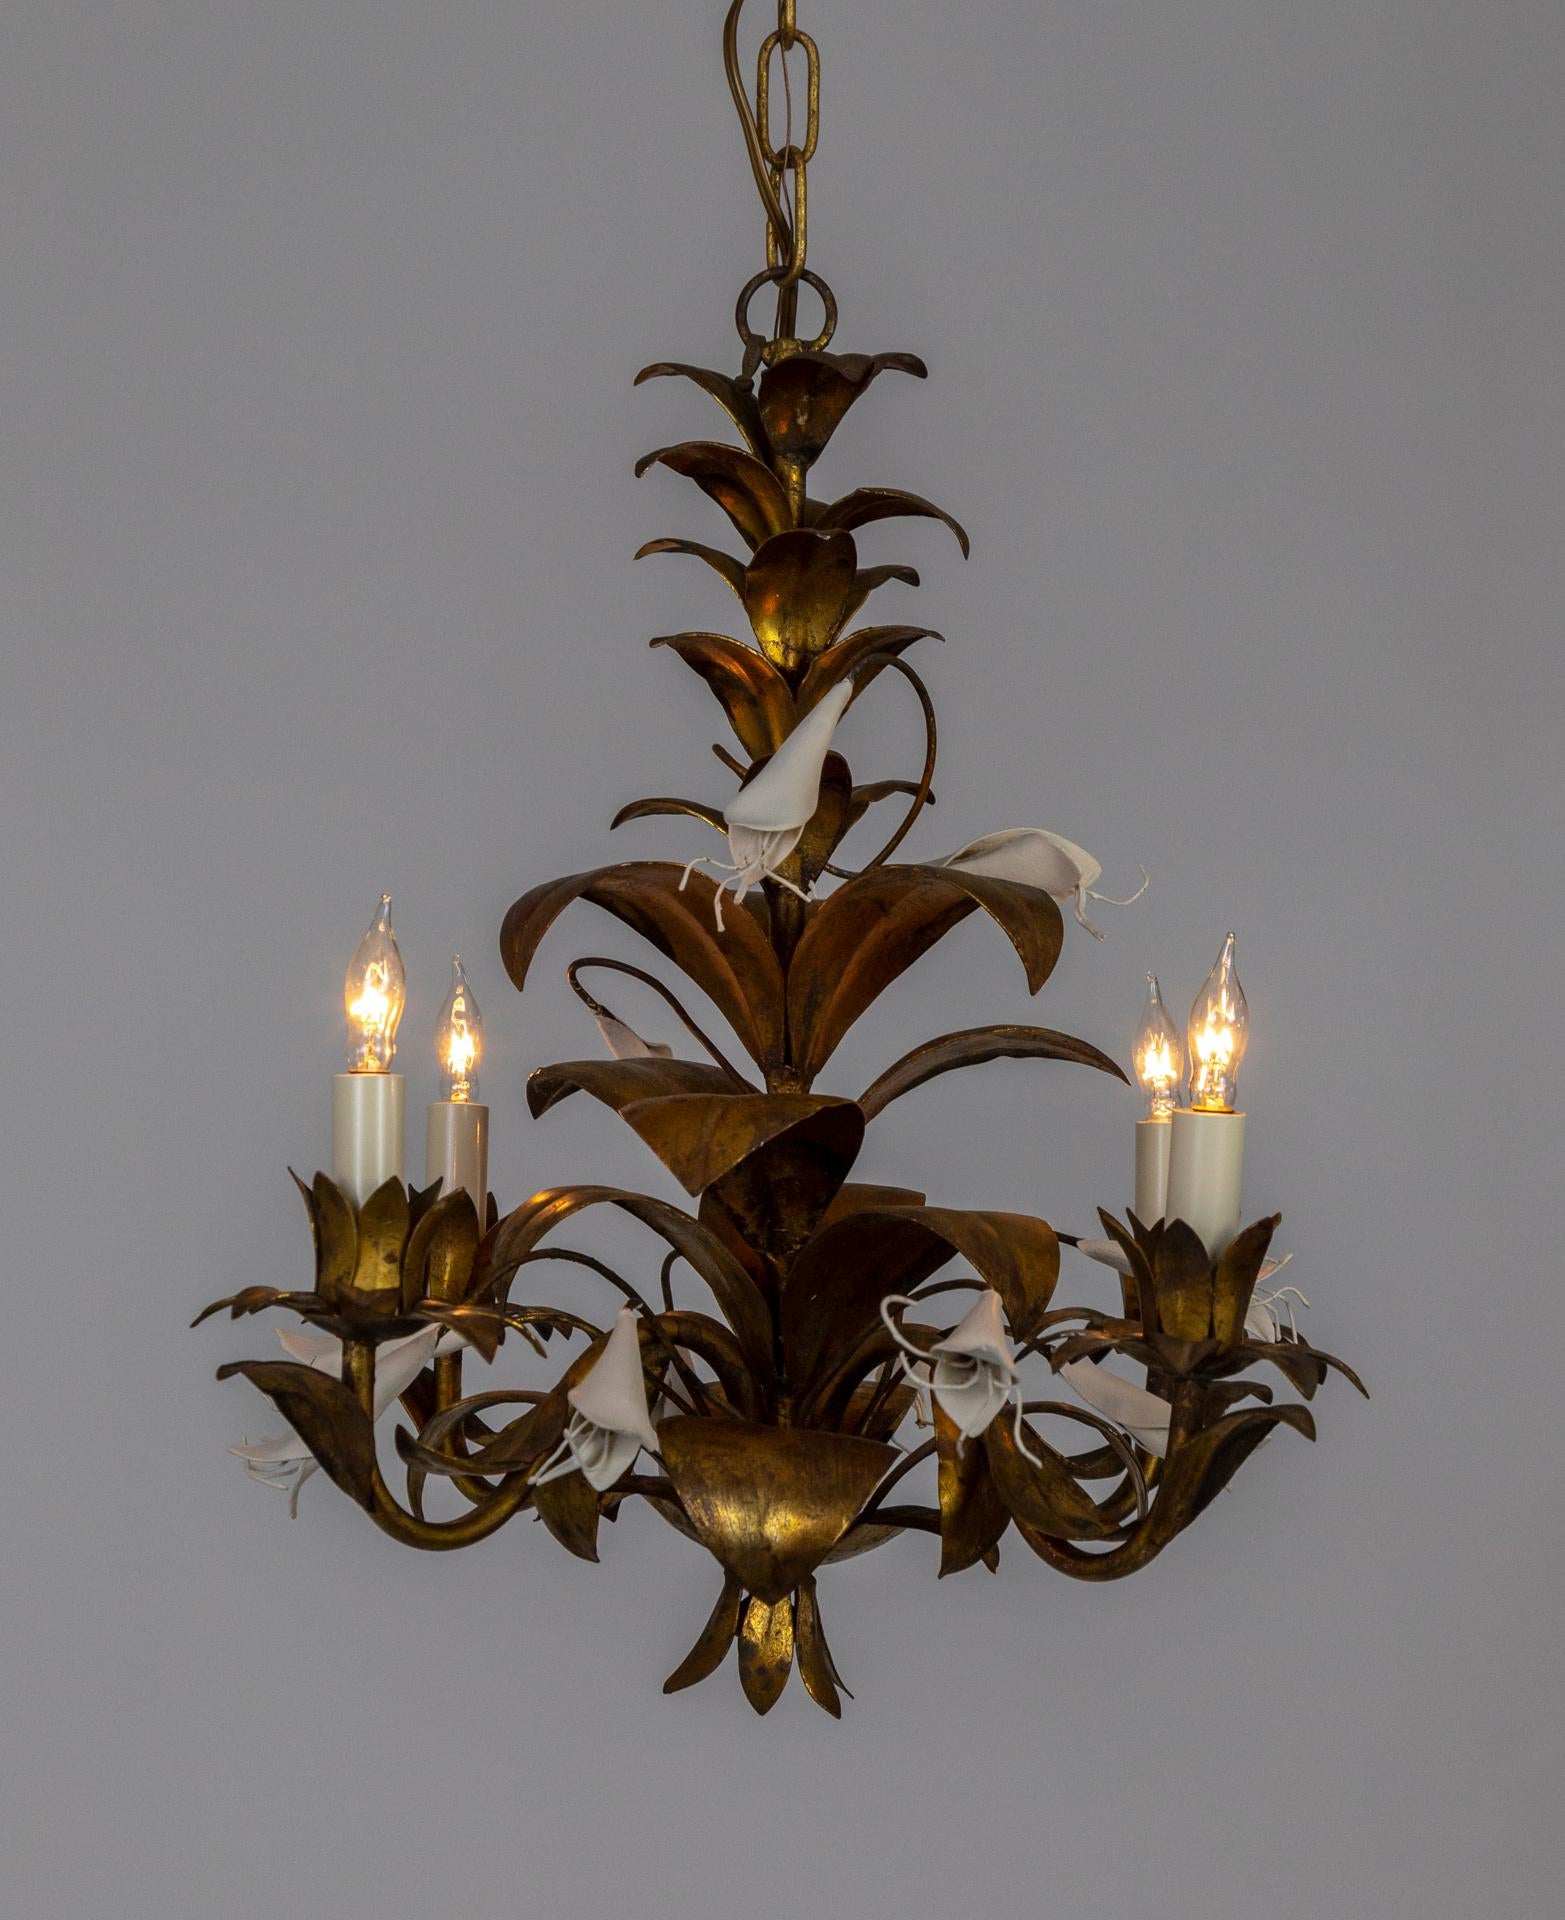 A 1950s, Italian chandelier with a gilded metal structure of large leaves and white painted flowers, with four candle-style lights. Hanging with a lengthy chain; 4 candelabra sockets, newly wired. Measures: 38